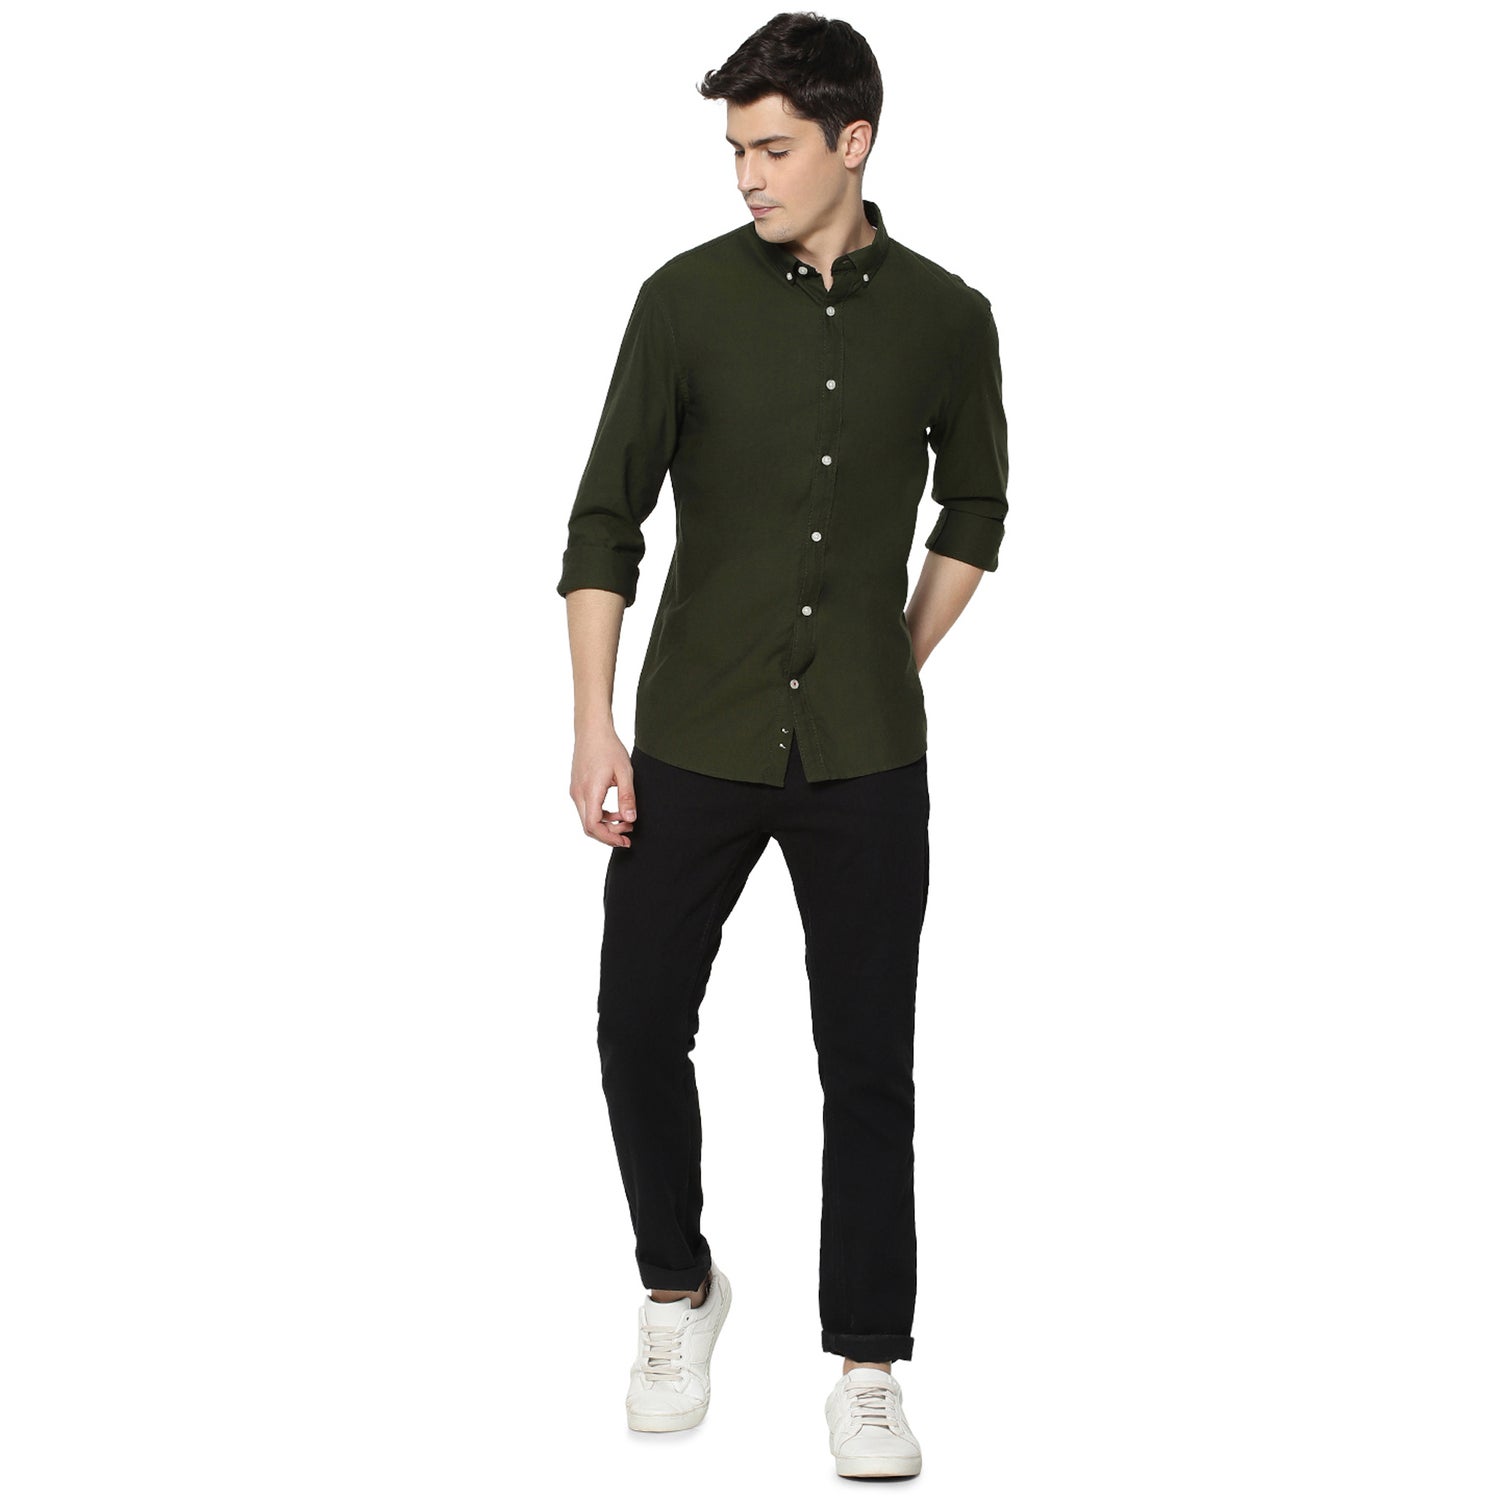 Olive Green Slim Fit Solid Casual Shirt (NAPINPOINT1)